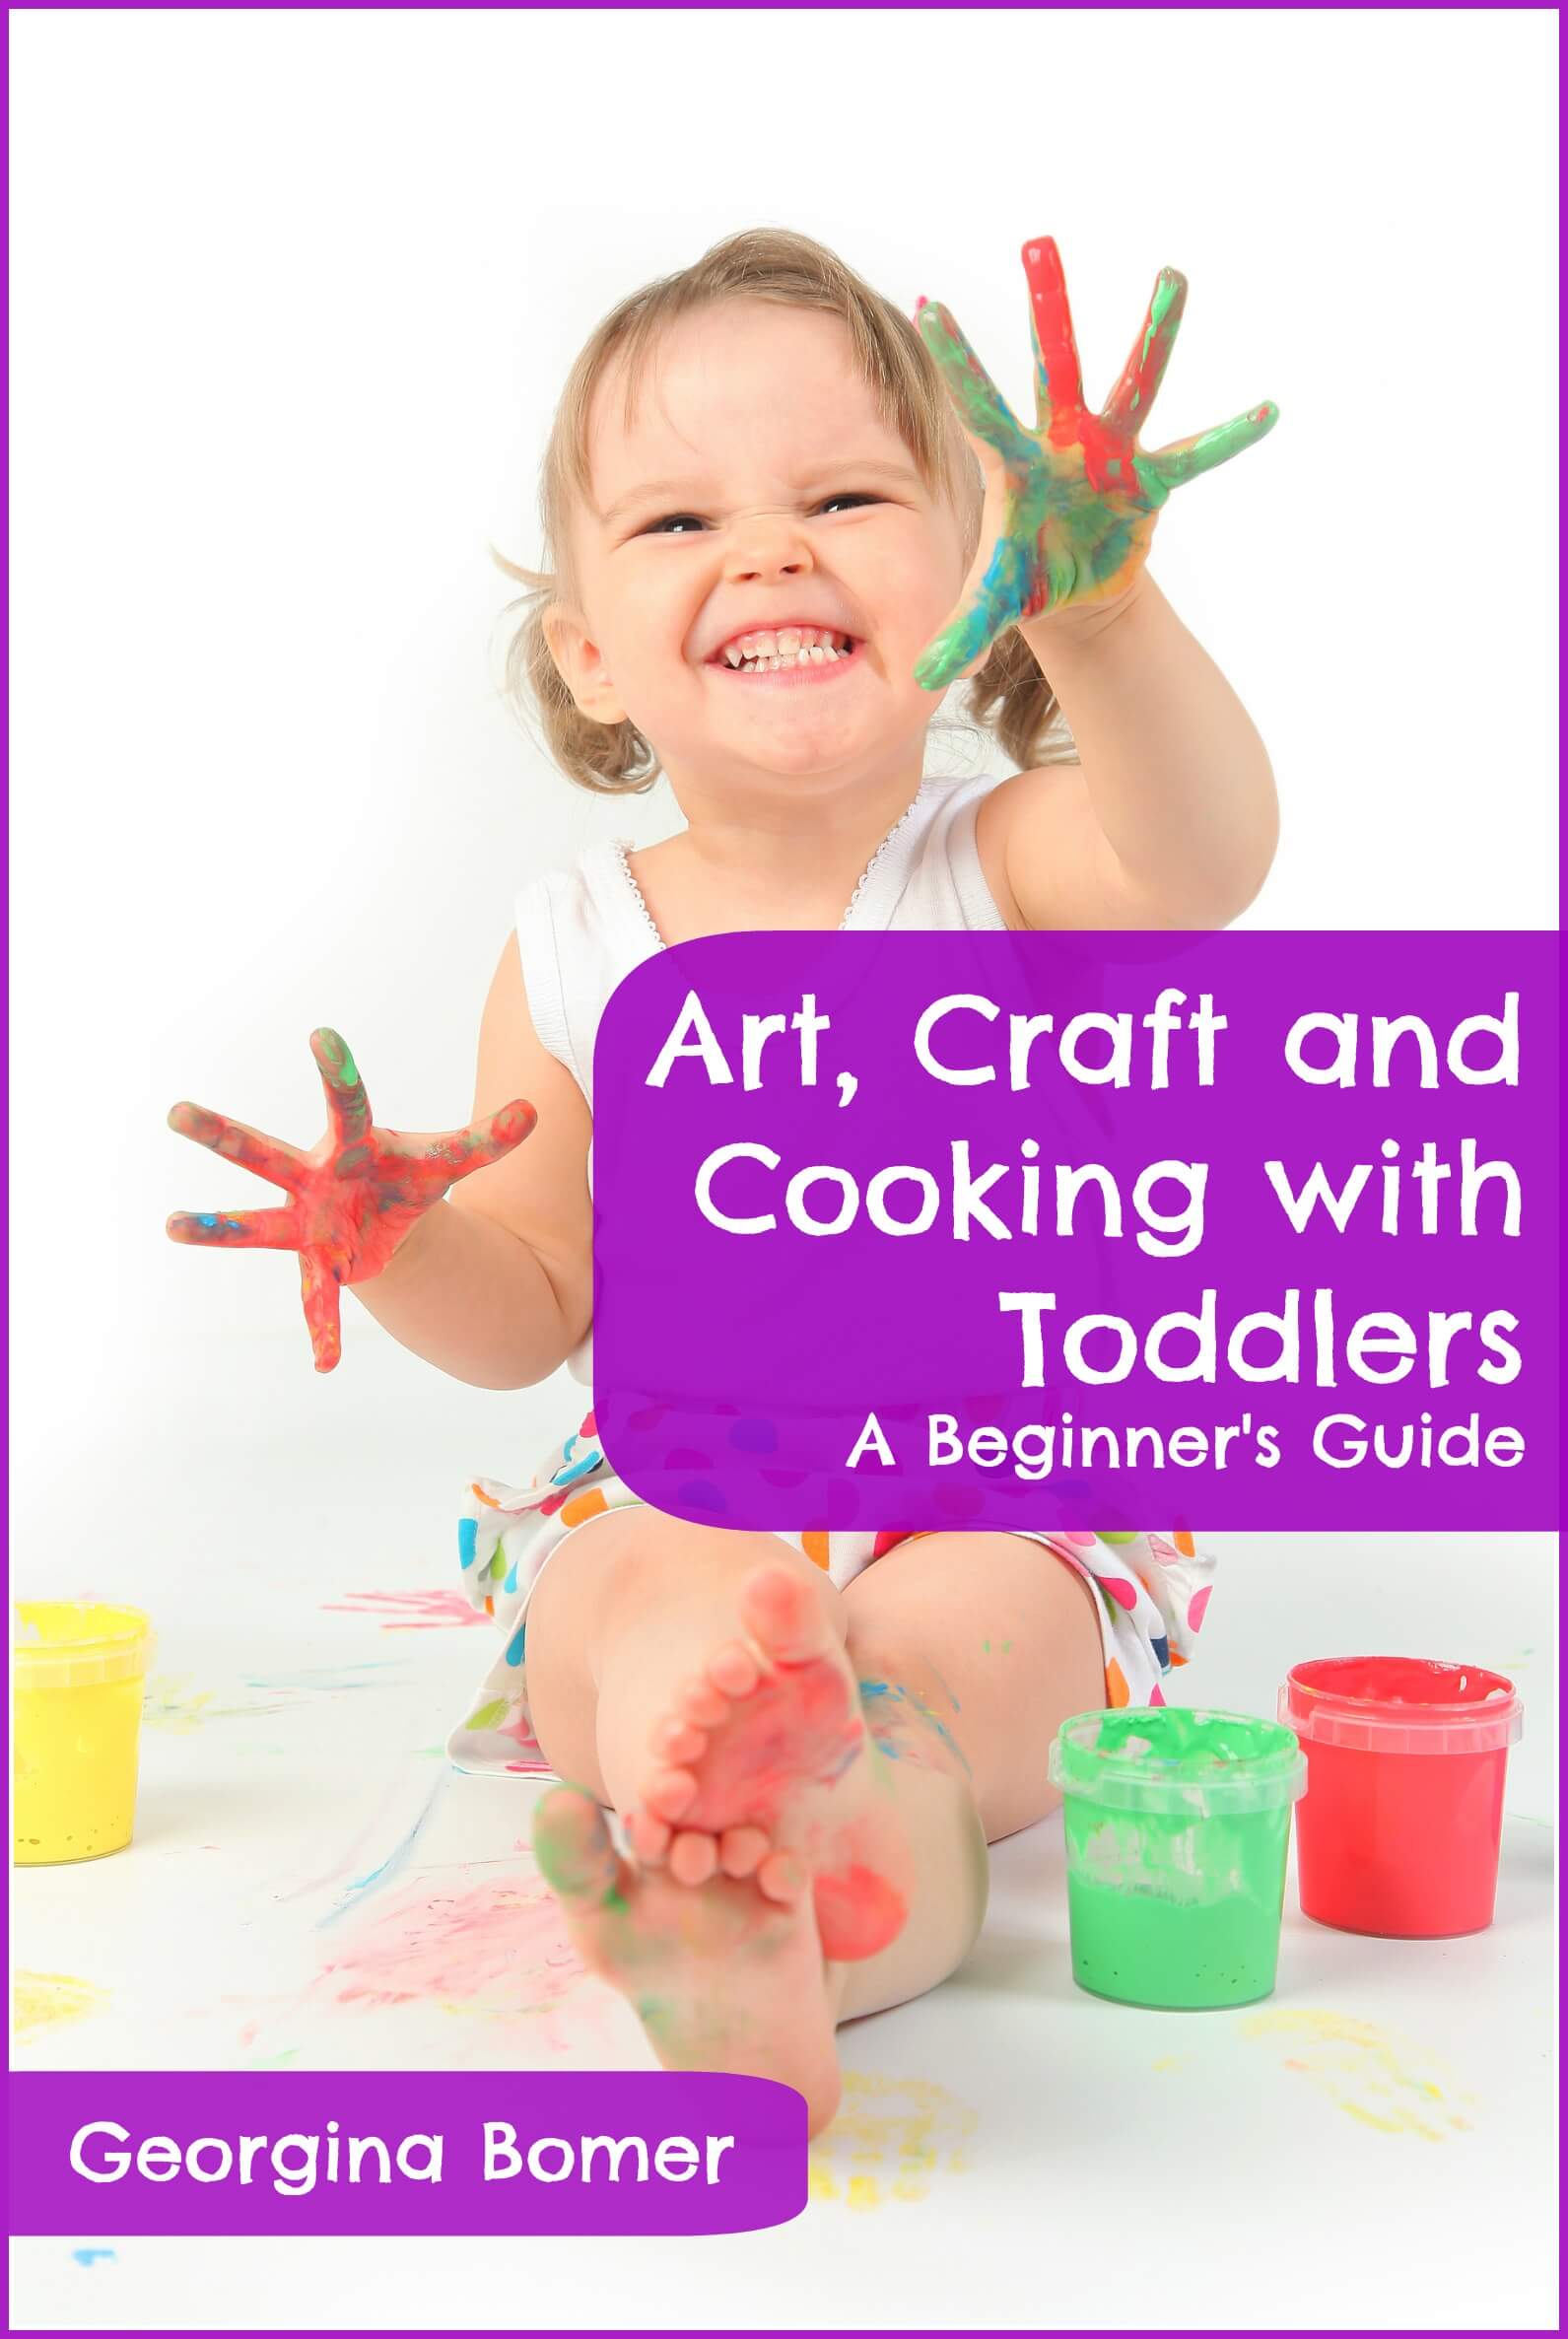 Toddler Bundle 2018 Art, Craft And Cooking with Toddlers